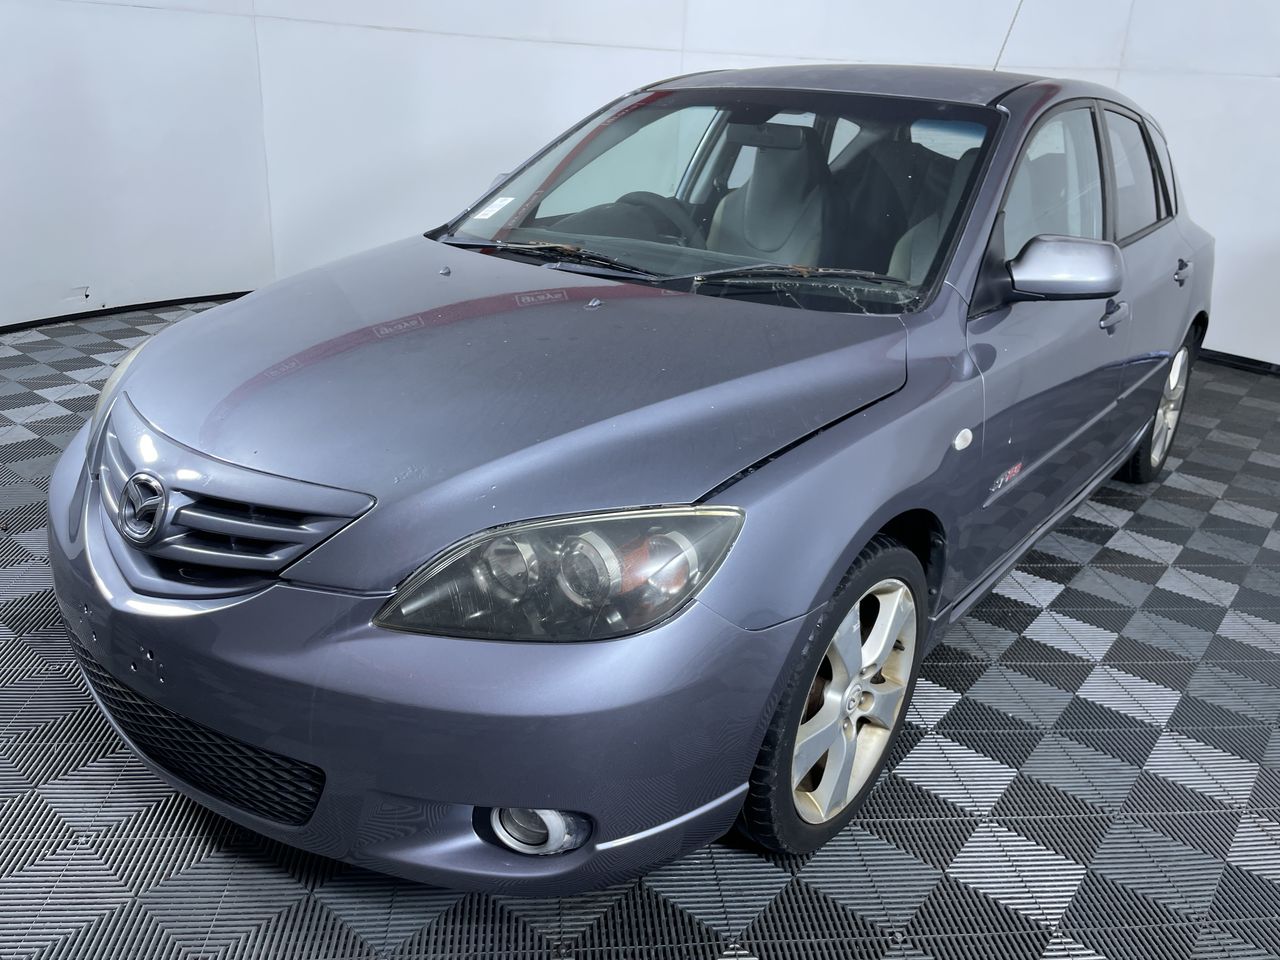 2004 Mazda 3 SP23 BK Automatic Hatchback (WOVR-INSPECTED) Auction  (0001-50703346)